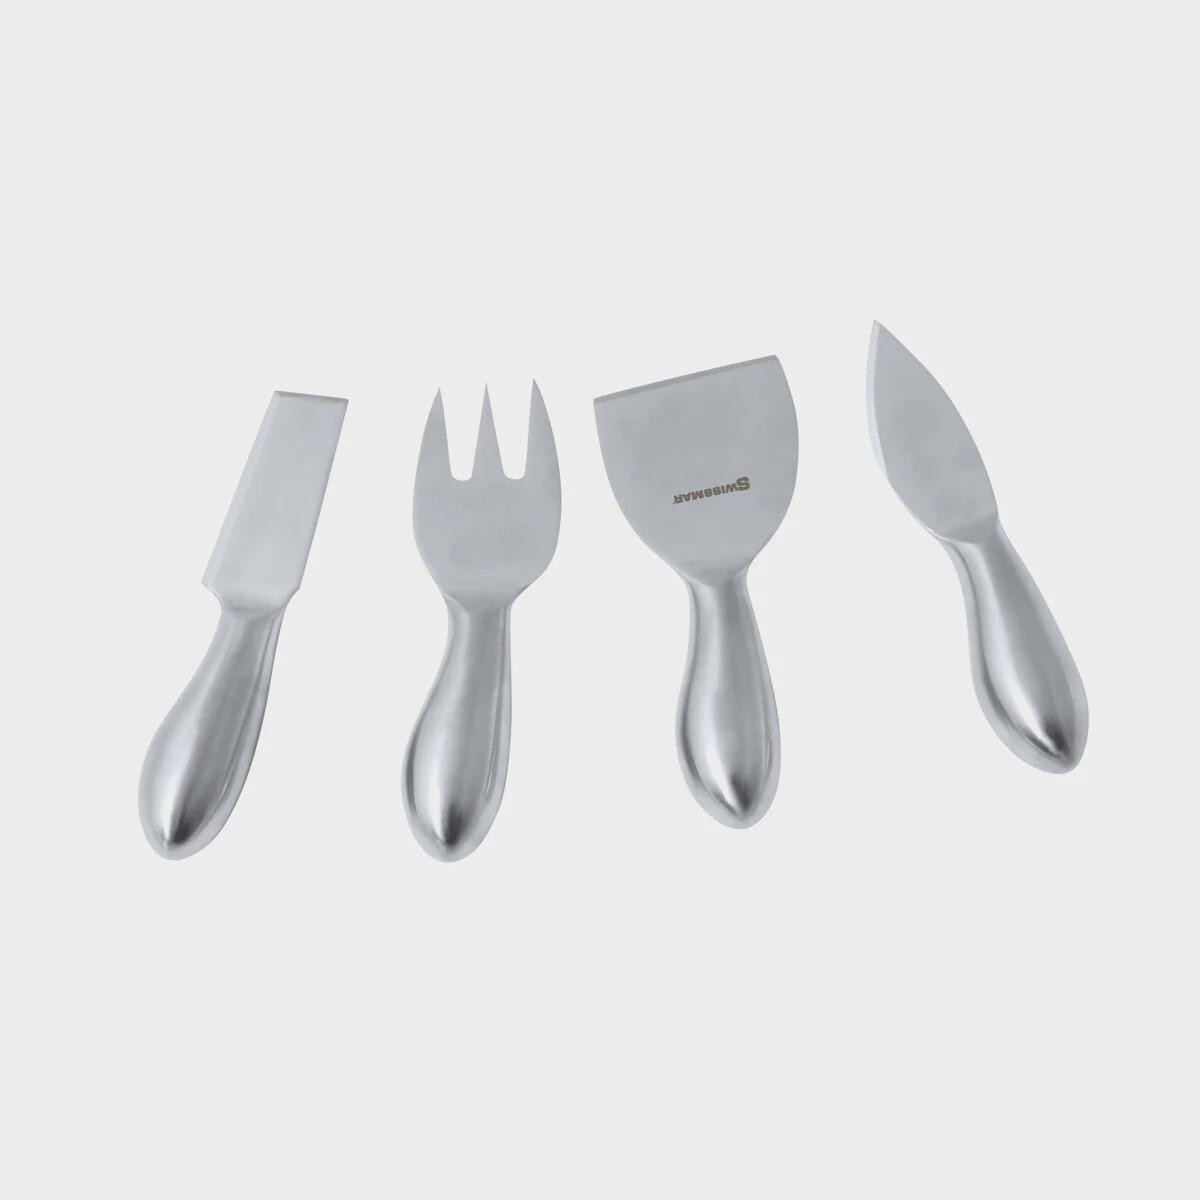 Cheese Knife Set | 4-Piece Stainless Steel Petite